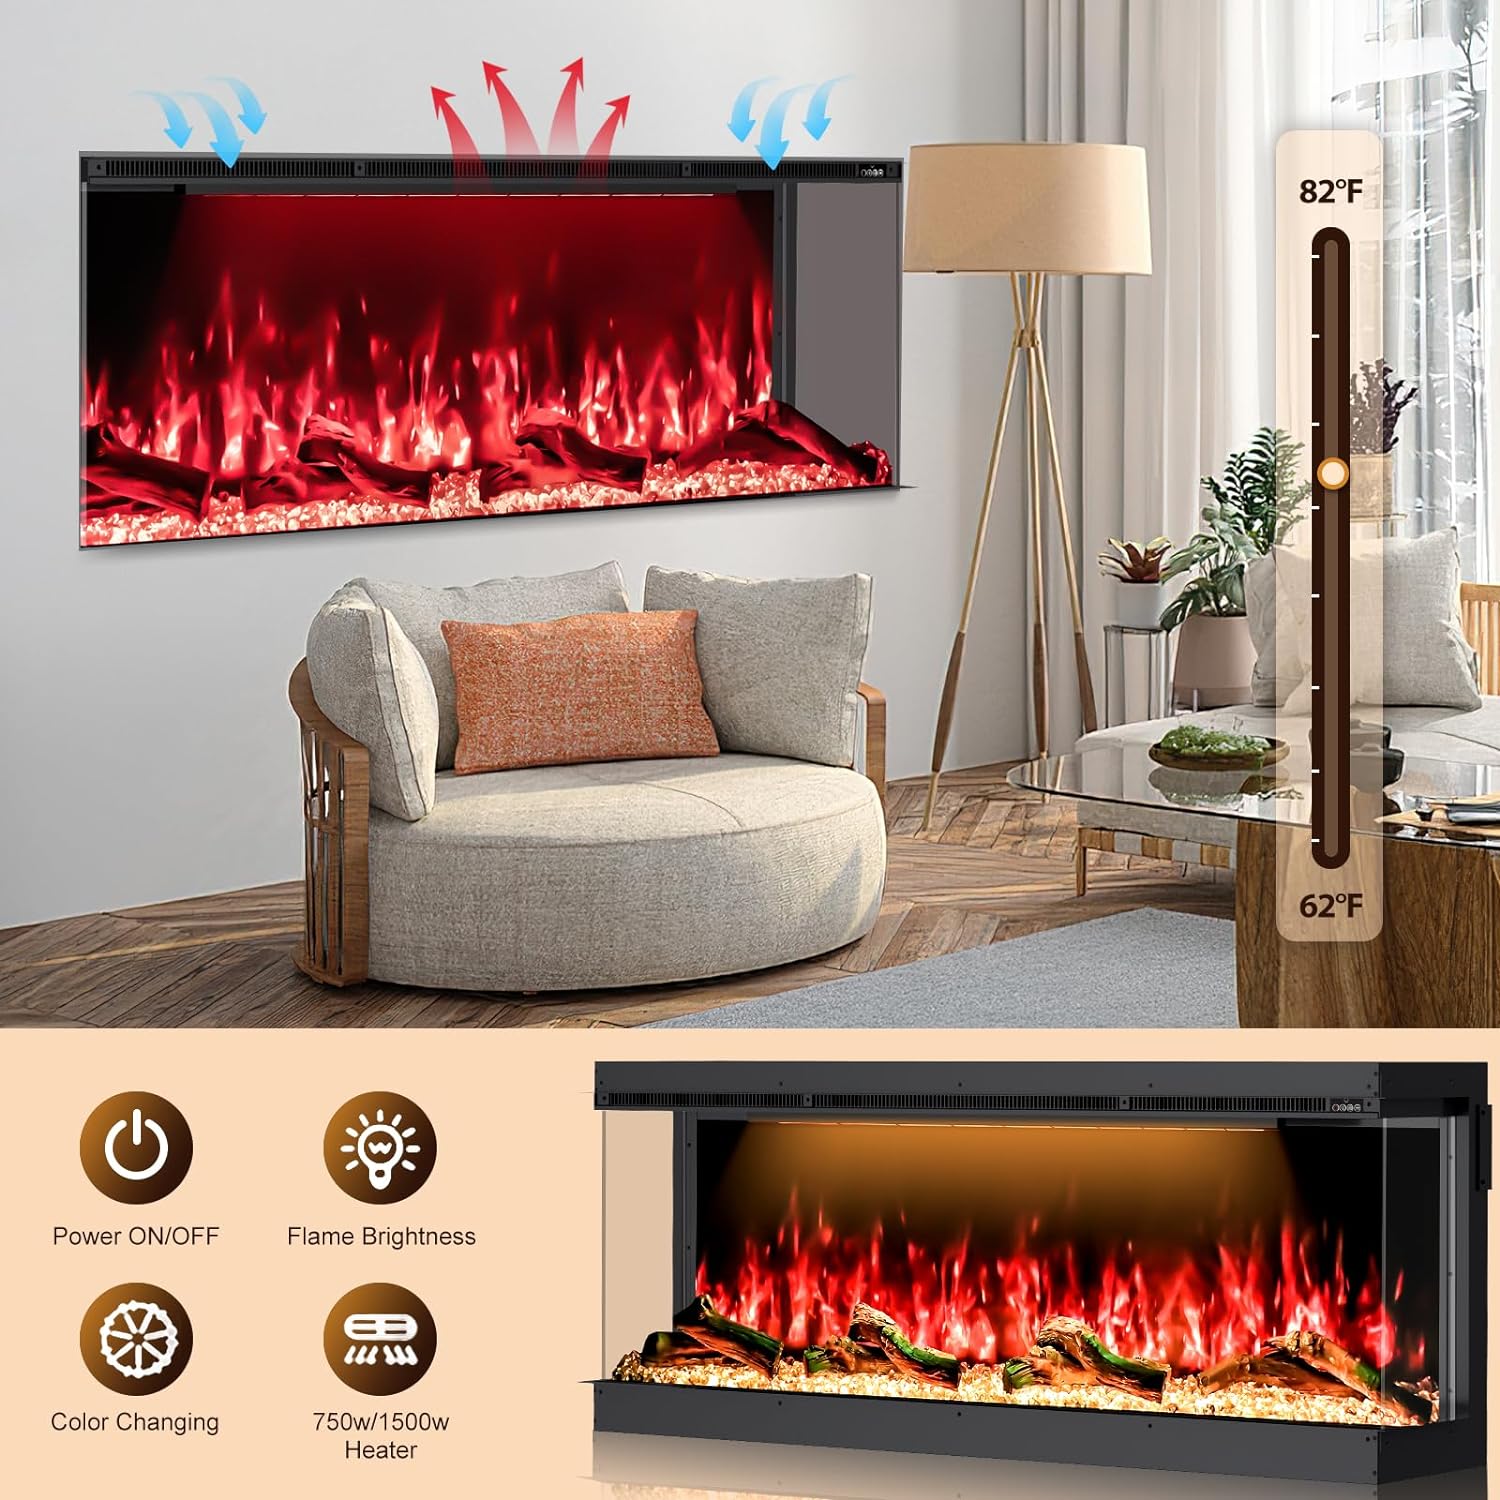 Recessed 3-Sided Electric Fireplace, 100-inch Smart WiFi 251 Flame Colors Combination Inserts Eletric Fire Place Heater for Living Room Indoor Use with Remote Control, Log & Crystals, Black